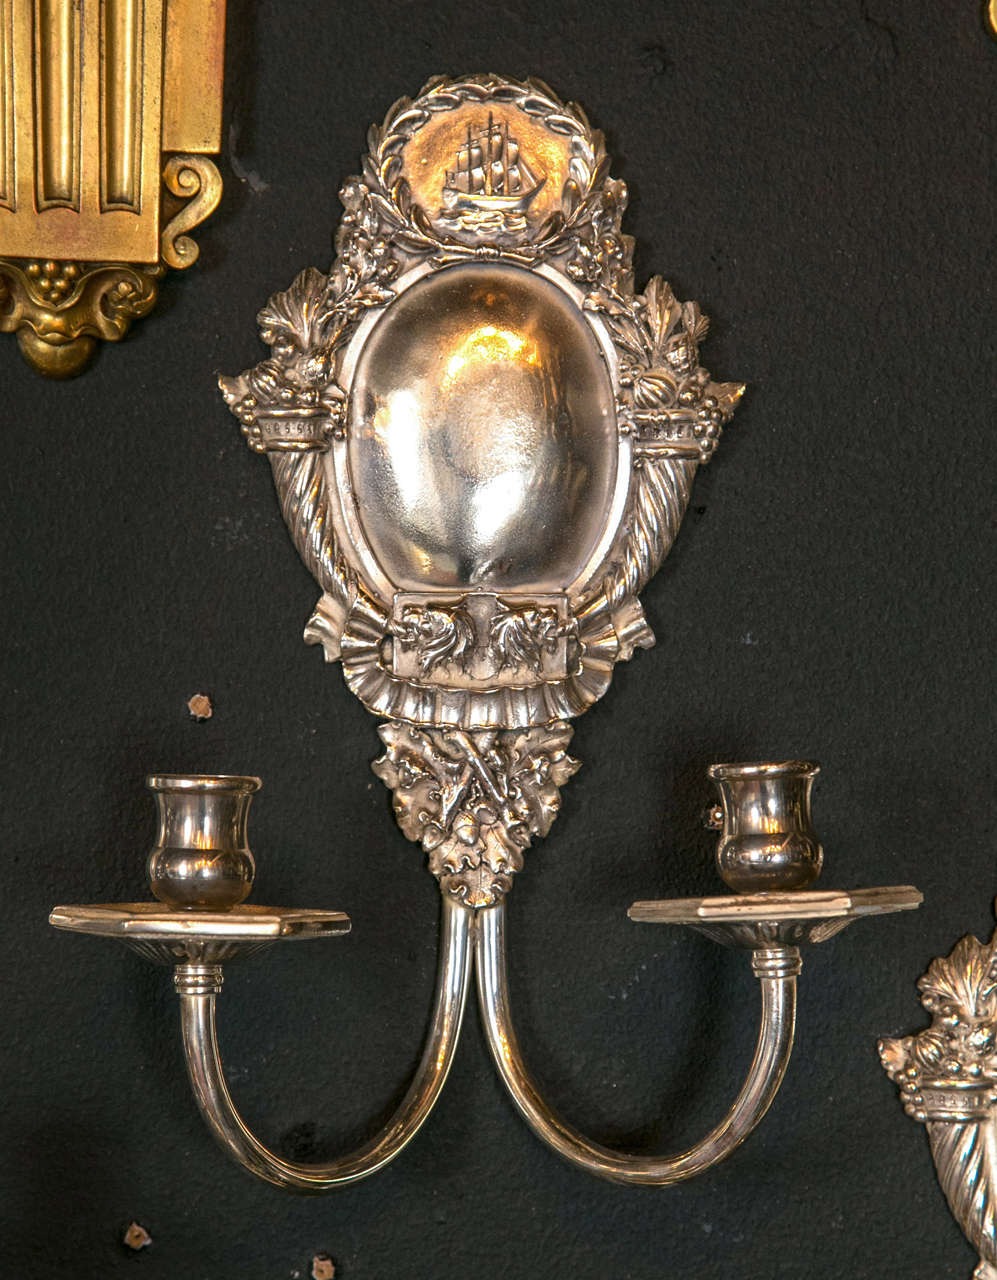 Pair of Caldwell silver plated sconces, featuring a ship design, circa 1920s. twelve available, priced per pair. Will be newly wired upon purchase.